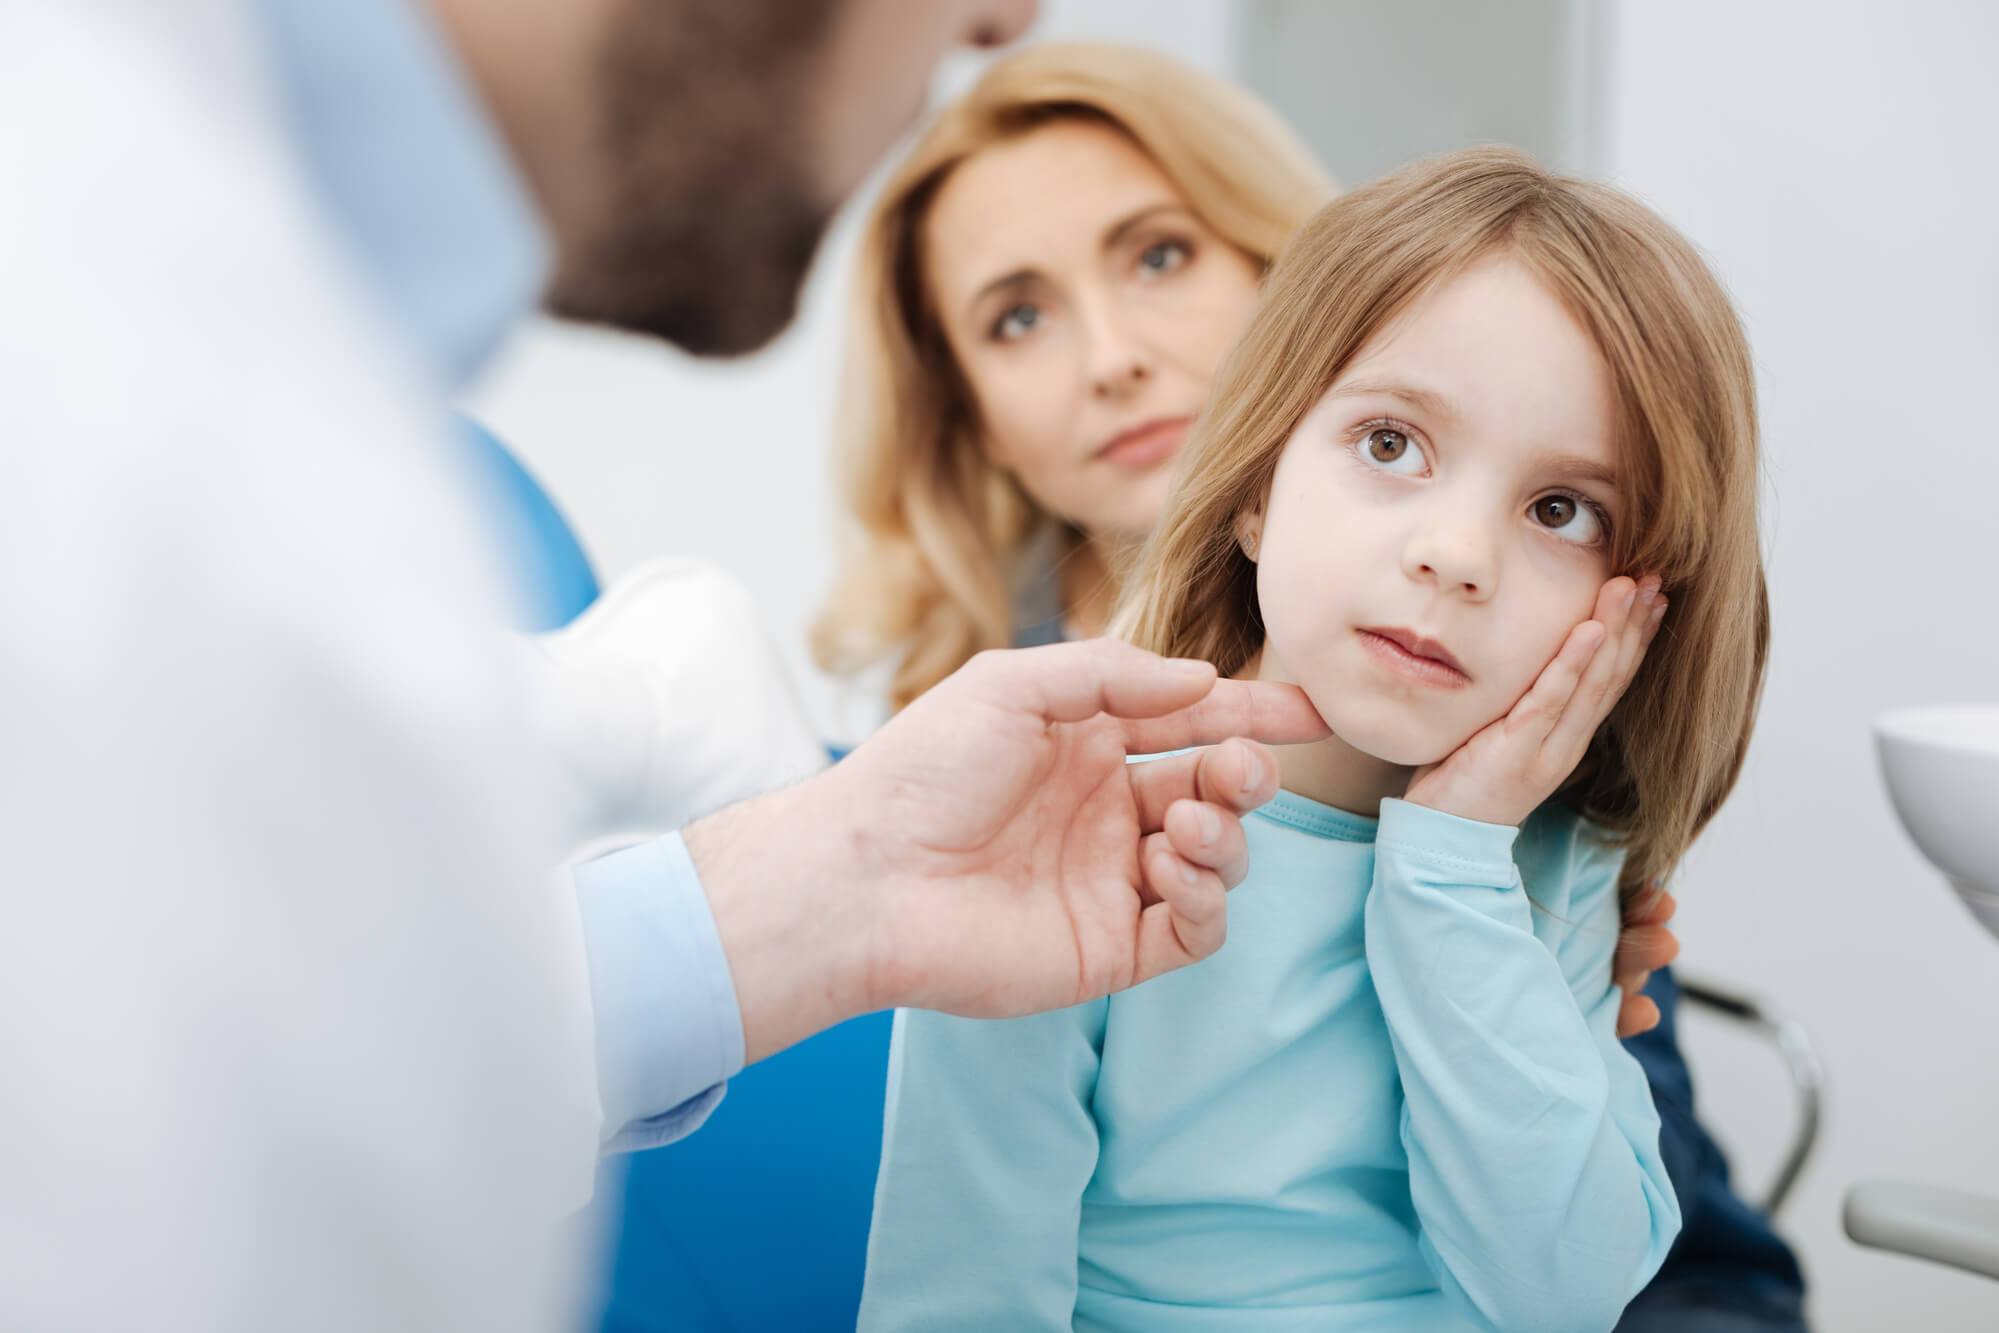 when should a child go to the dentist